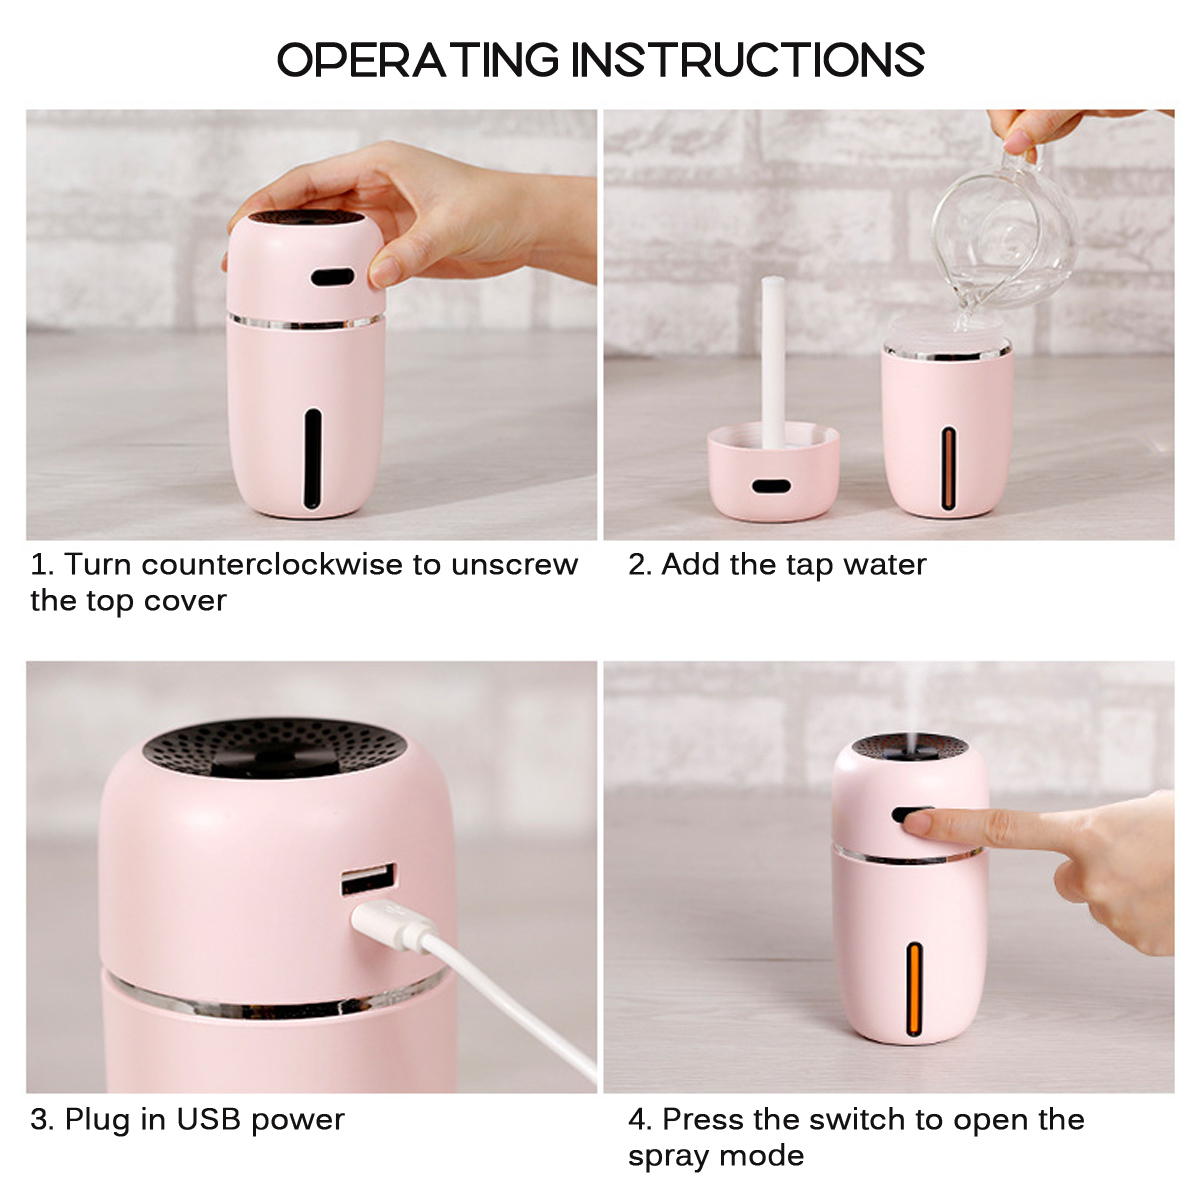 200ml-Electric-Air-Humidifier-Diffuser-Aroma-Mist-Purifier-LED-Light-USB-Charging-Power-Bank-for-Por-1809965-5